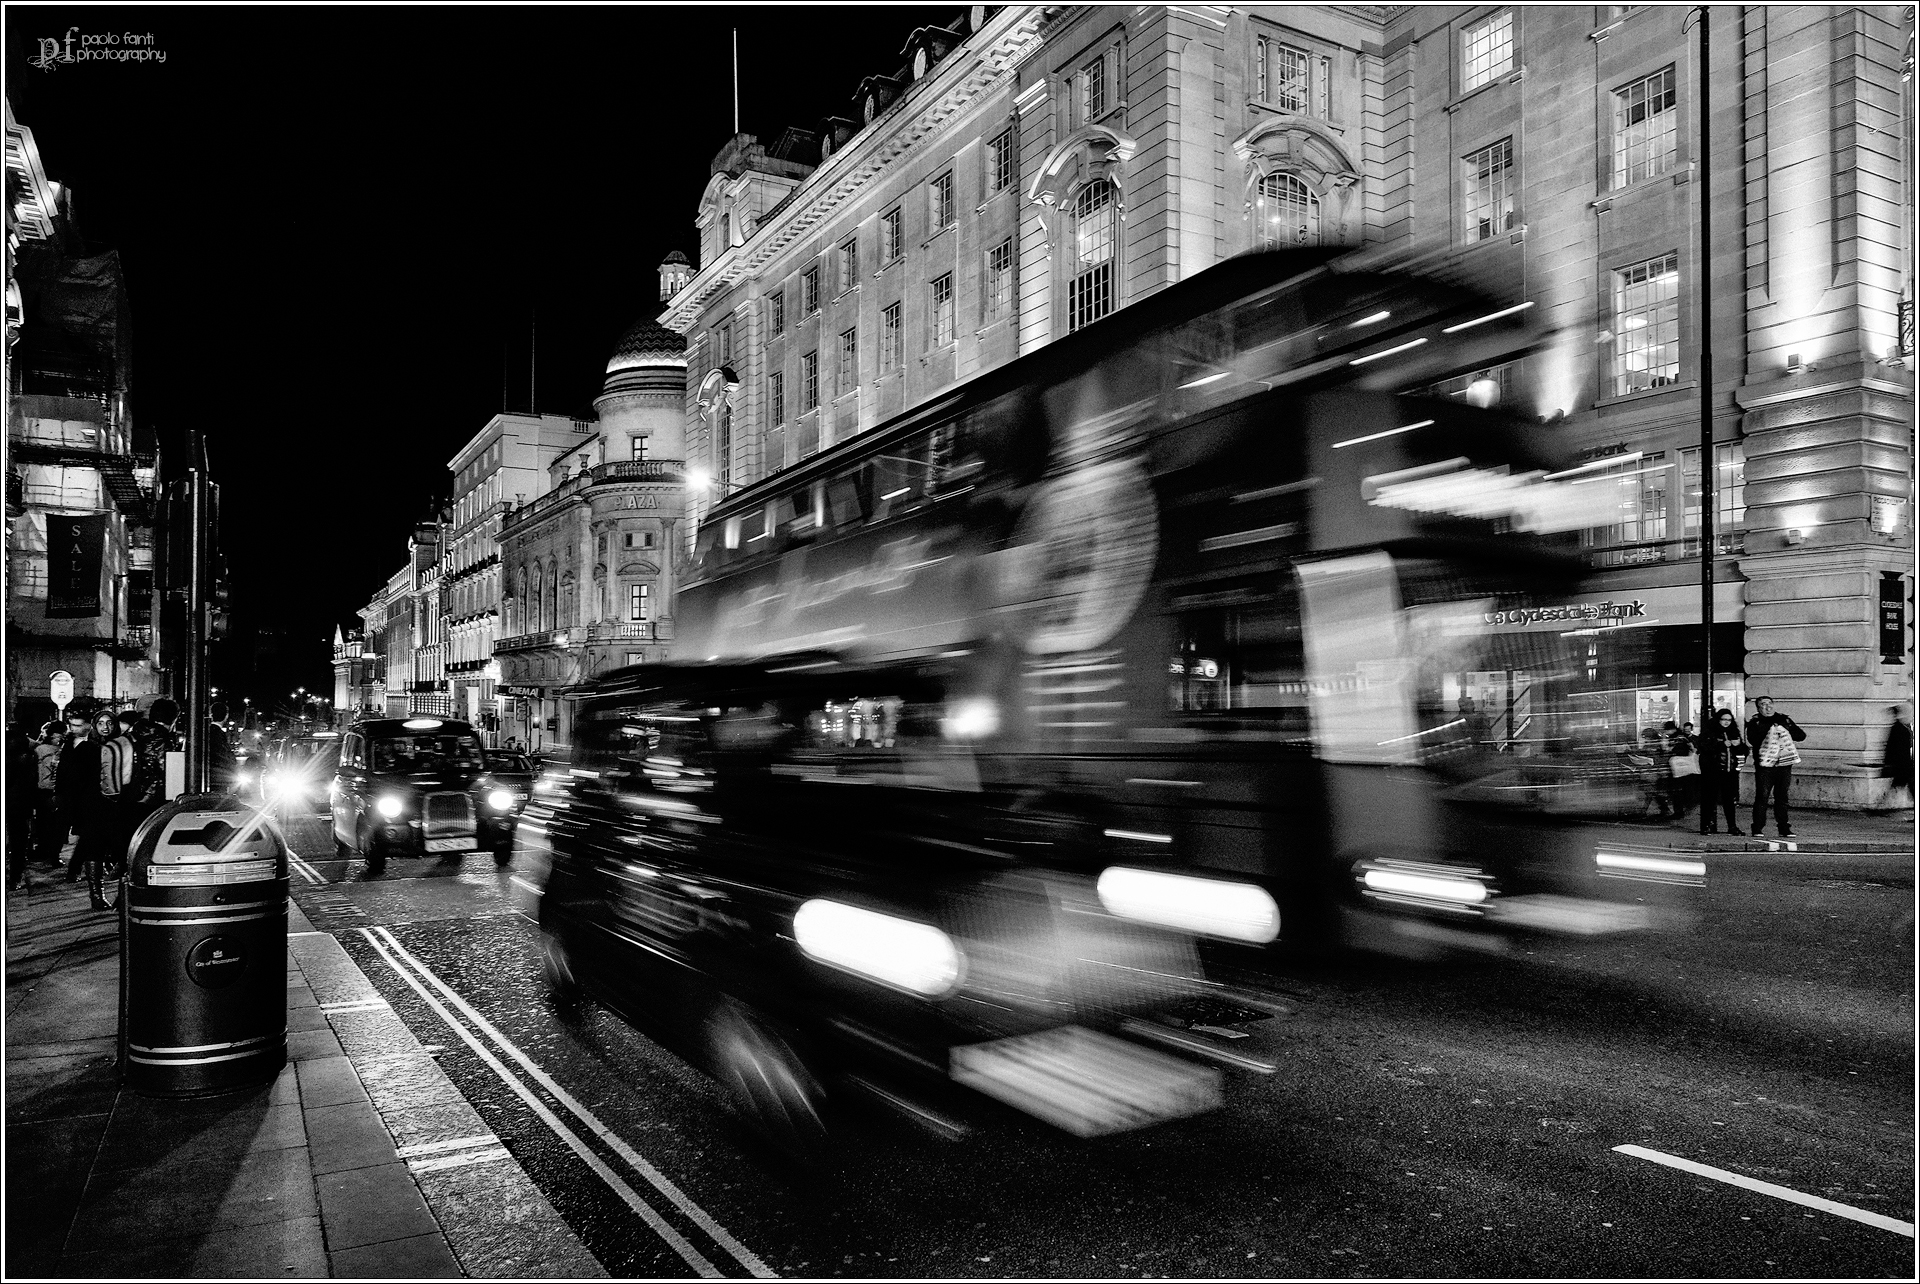 Towards Piccadilly Circus...